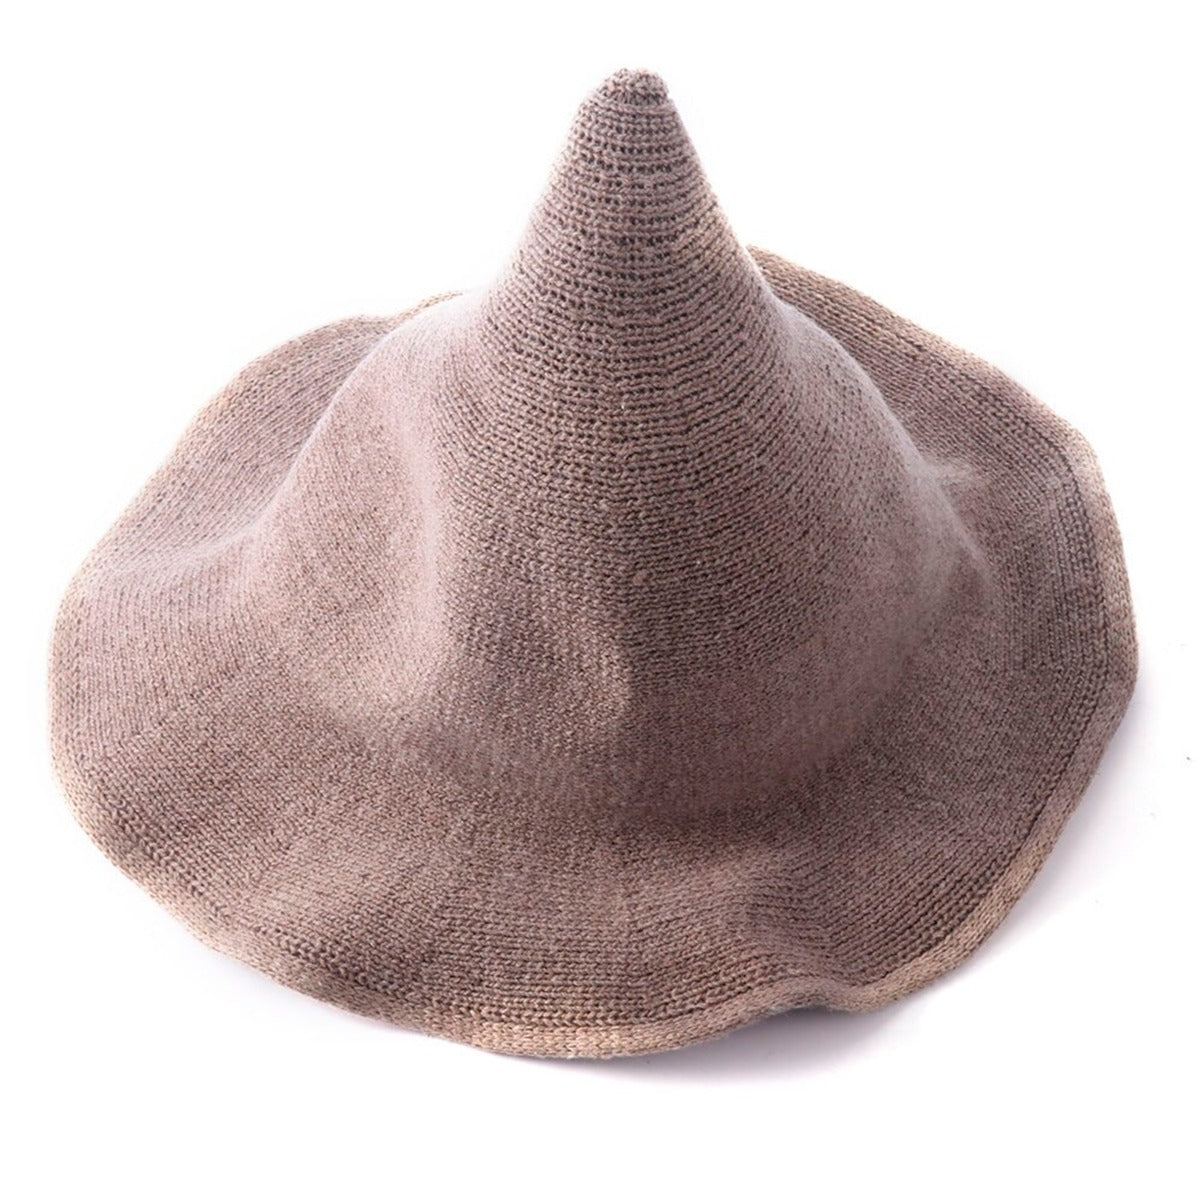 Tan Wool Witches Hat - 13 Moons